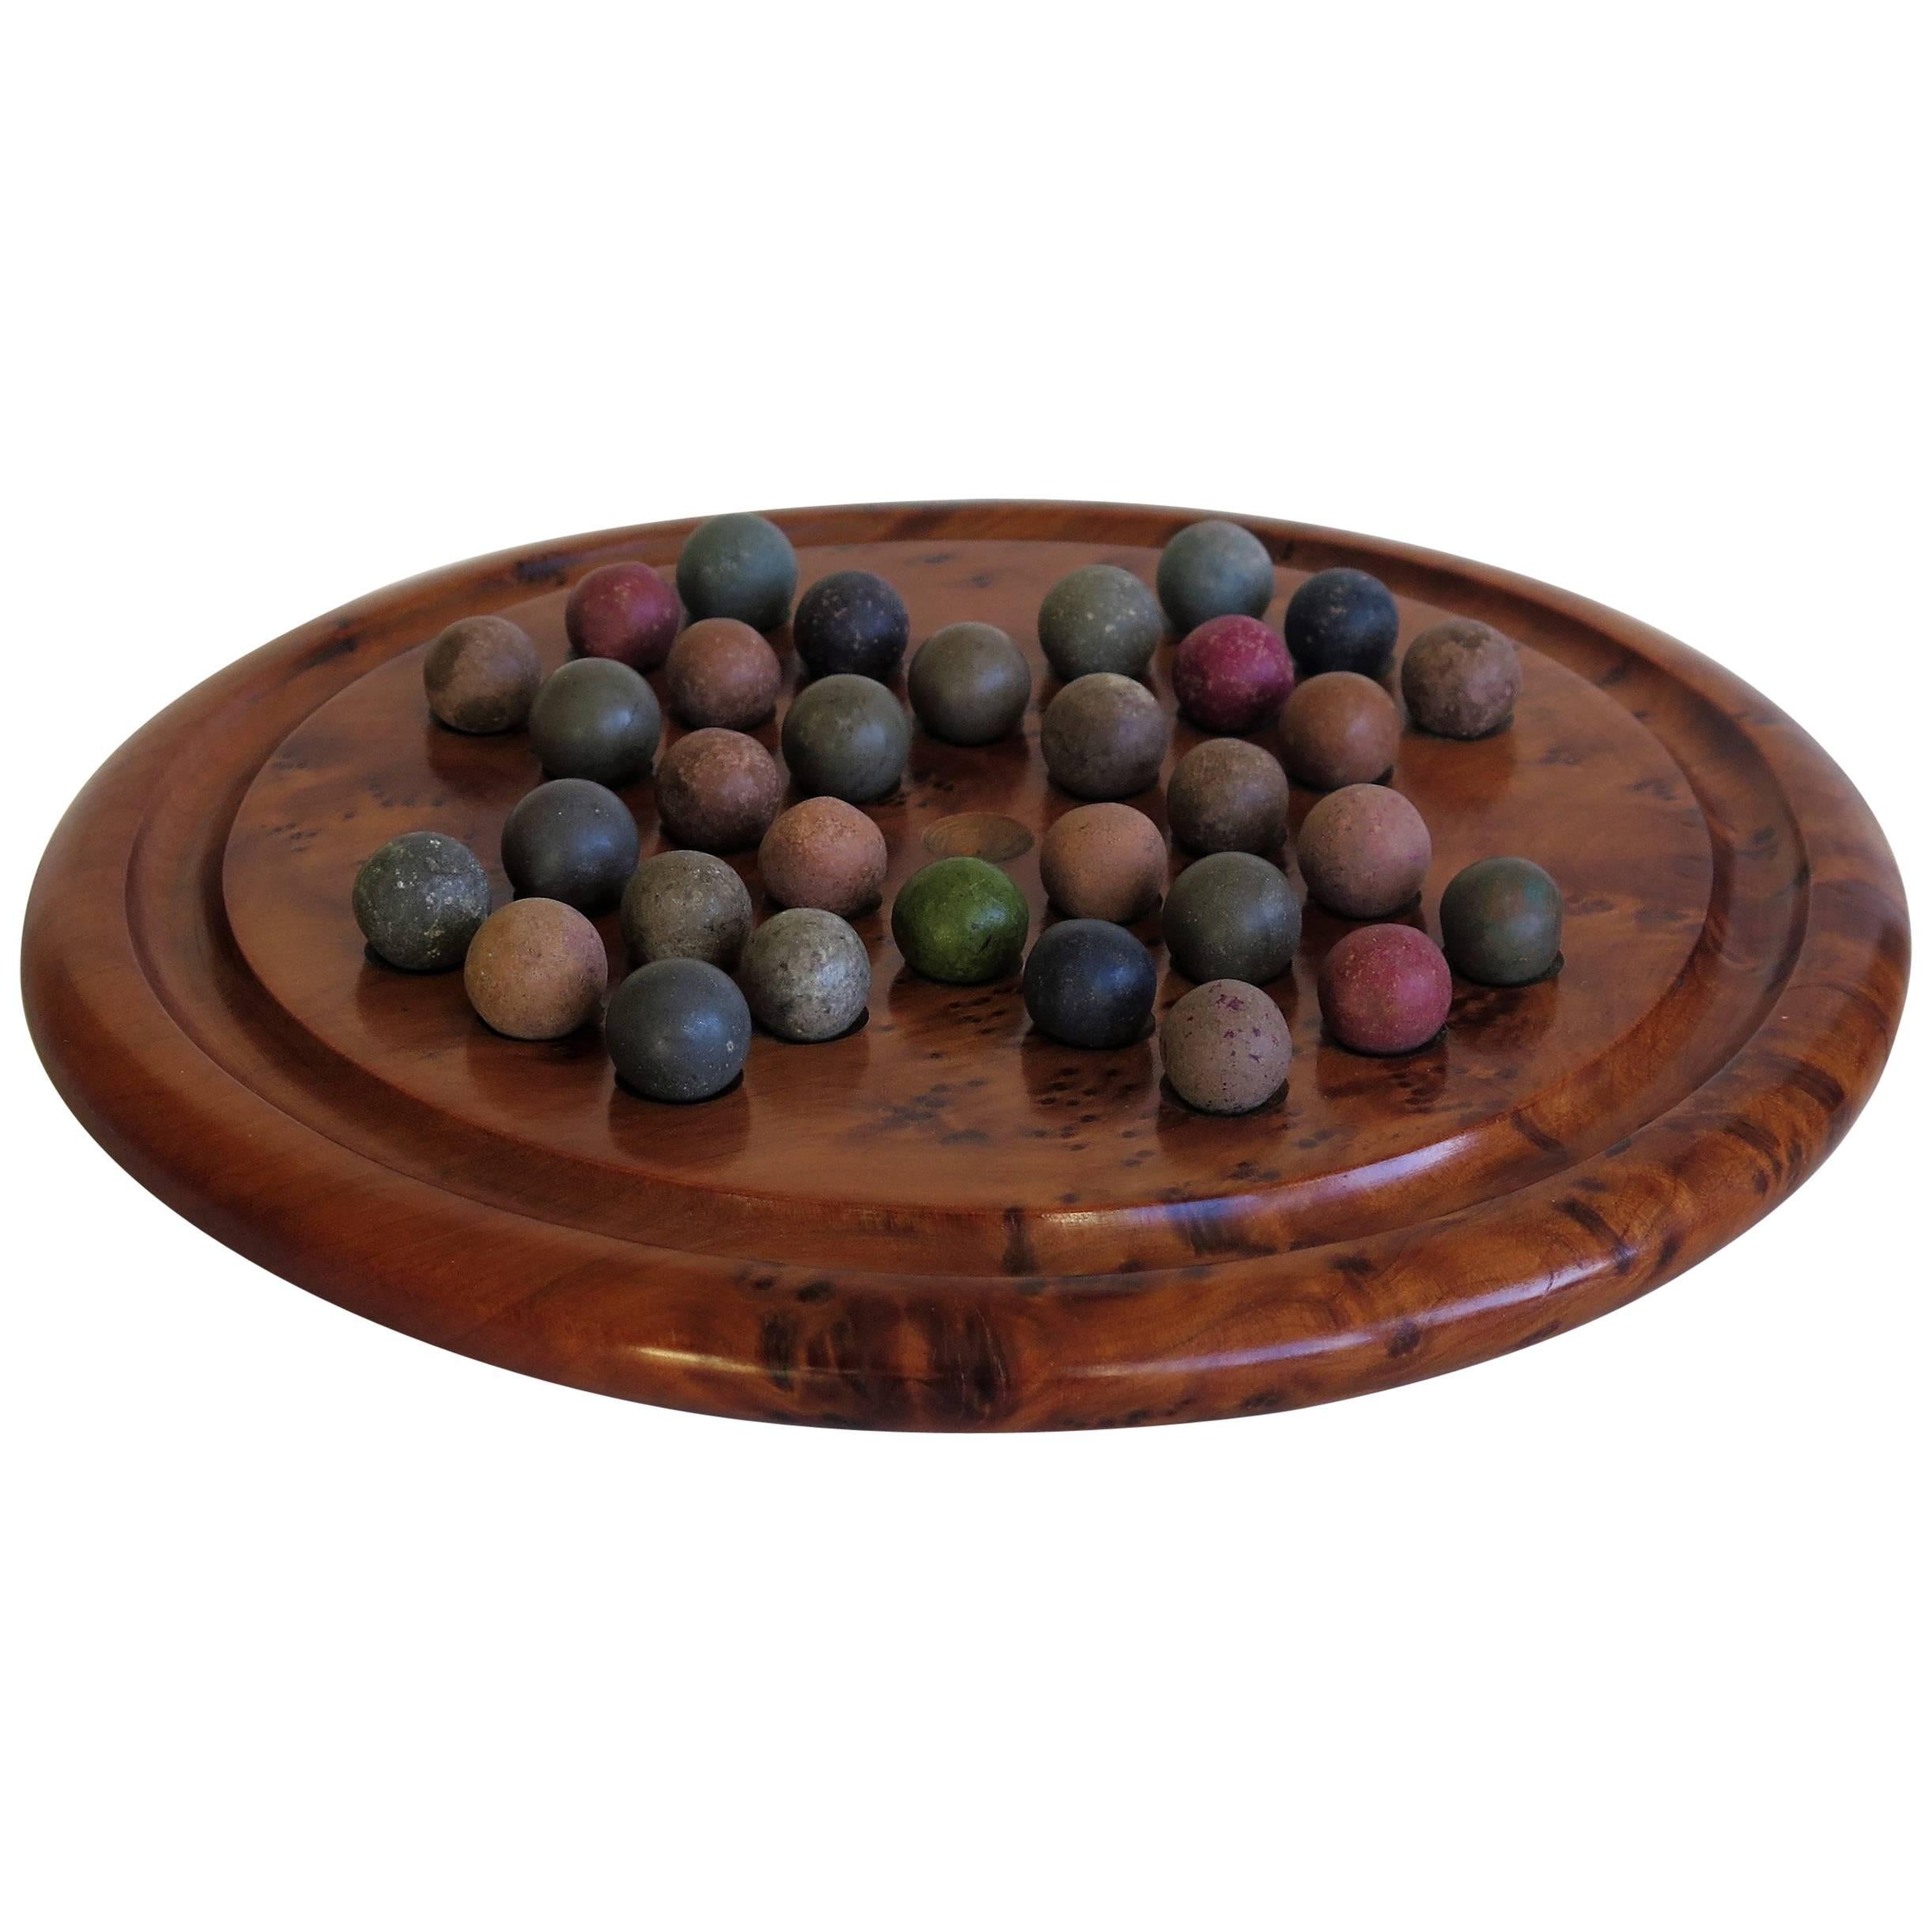 Marble Solitaire Board Game with 32 Early Handmade Stone Marbles, Ca 1900